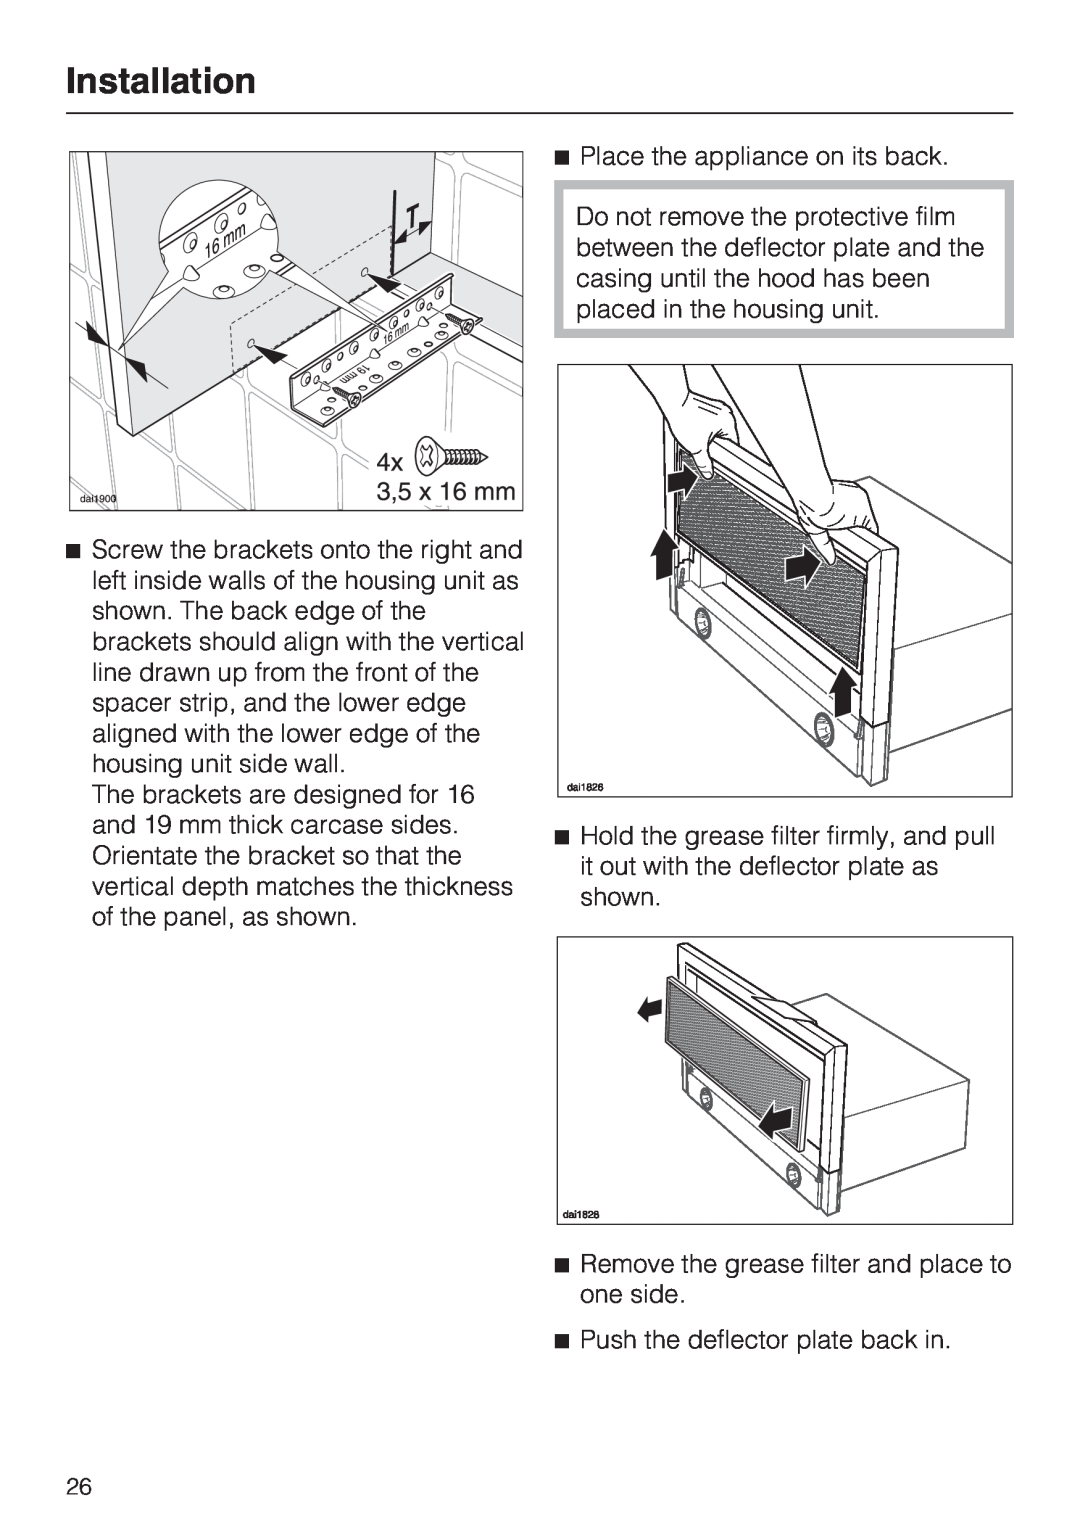 Miele DA 3190, DA 3160 installation instructions Installation, Place the appliance on its back 